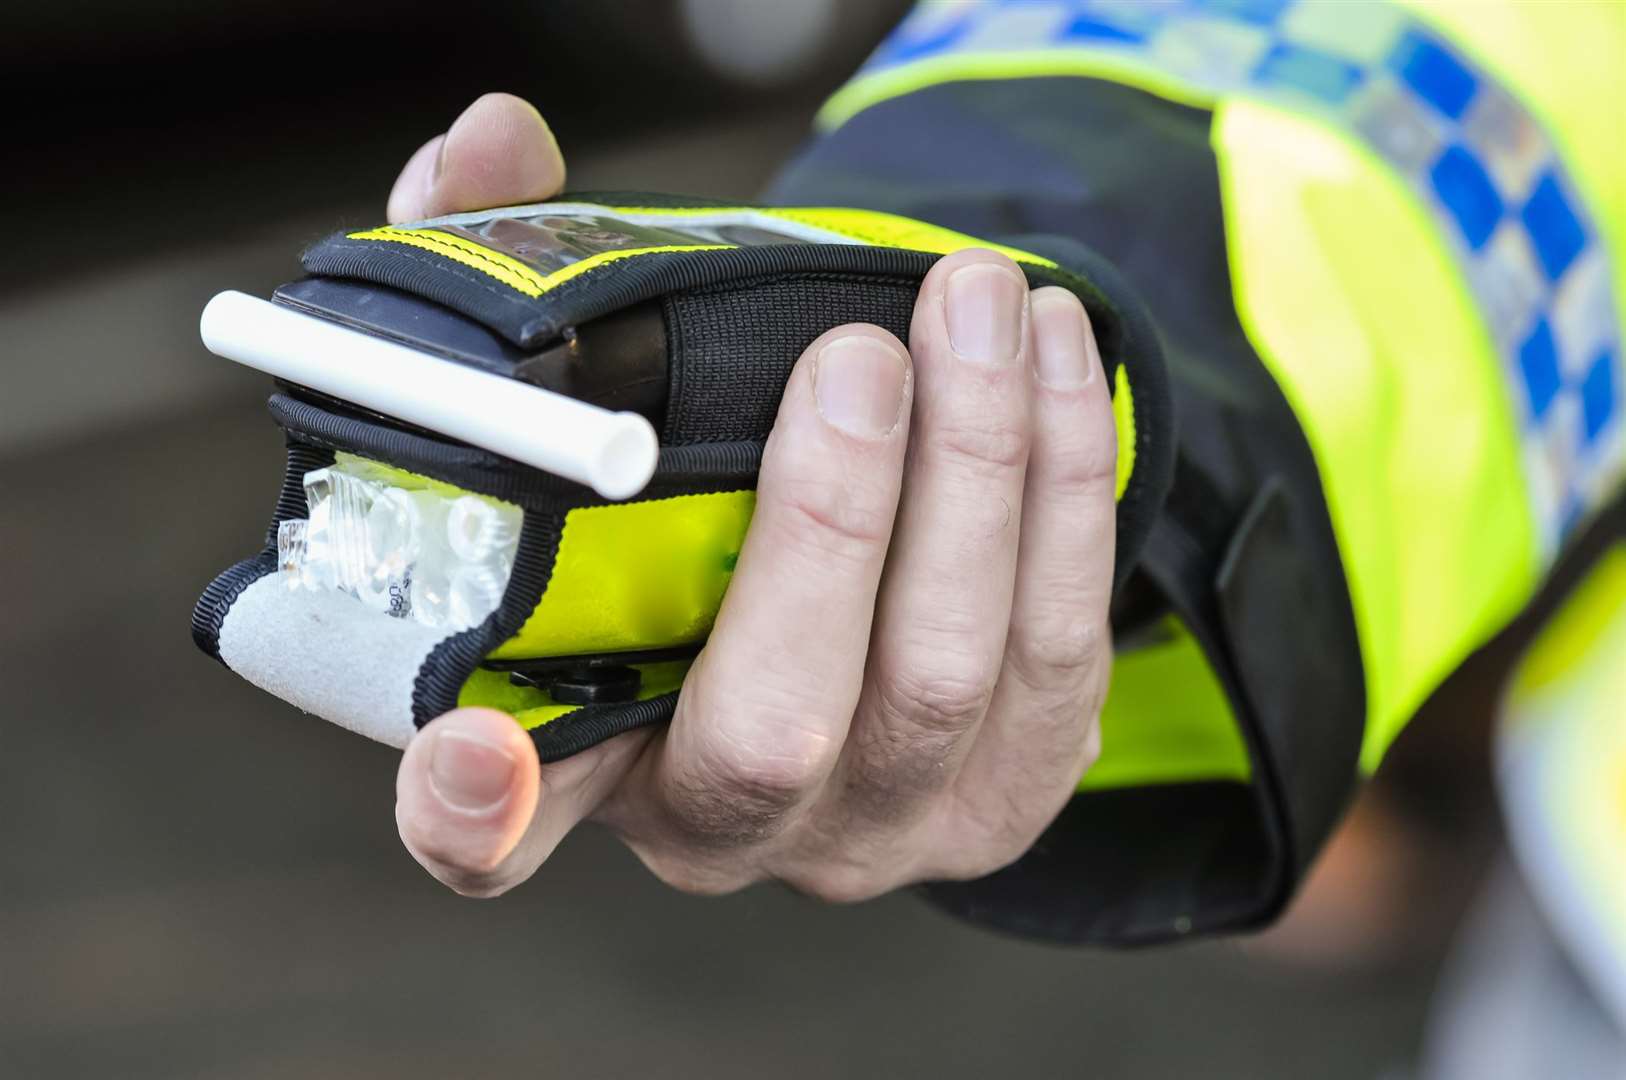 Akehurst was found to be over the legal drink-drive limit